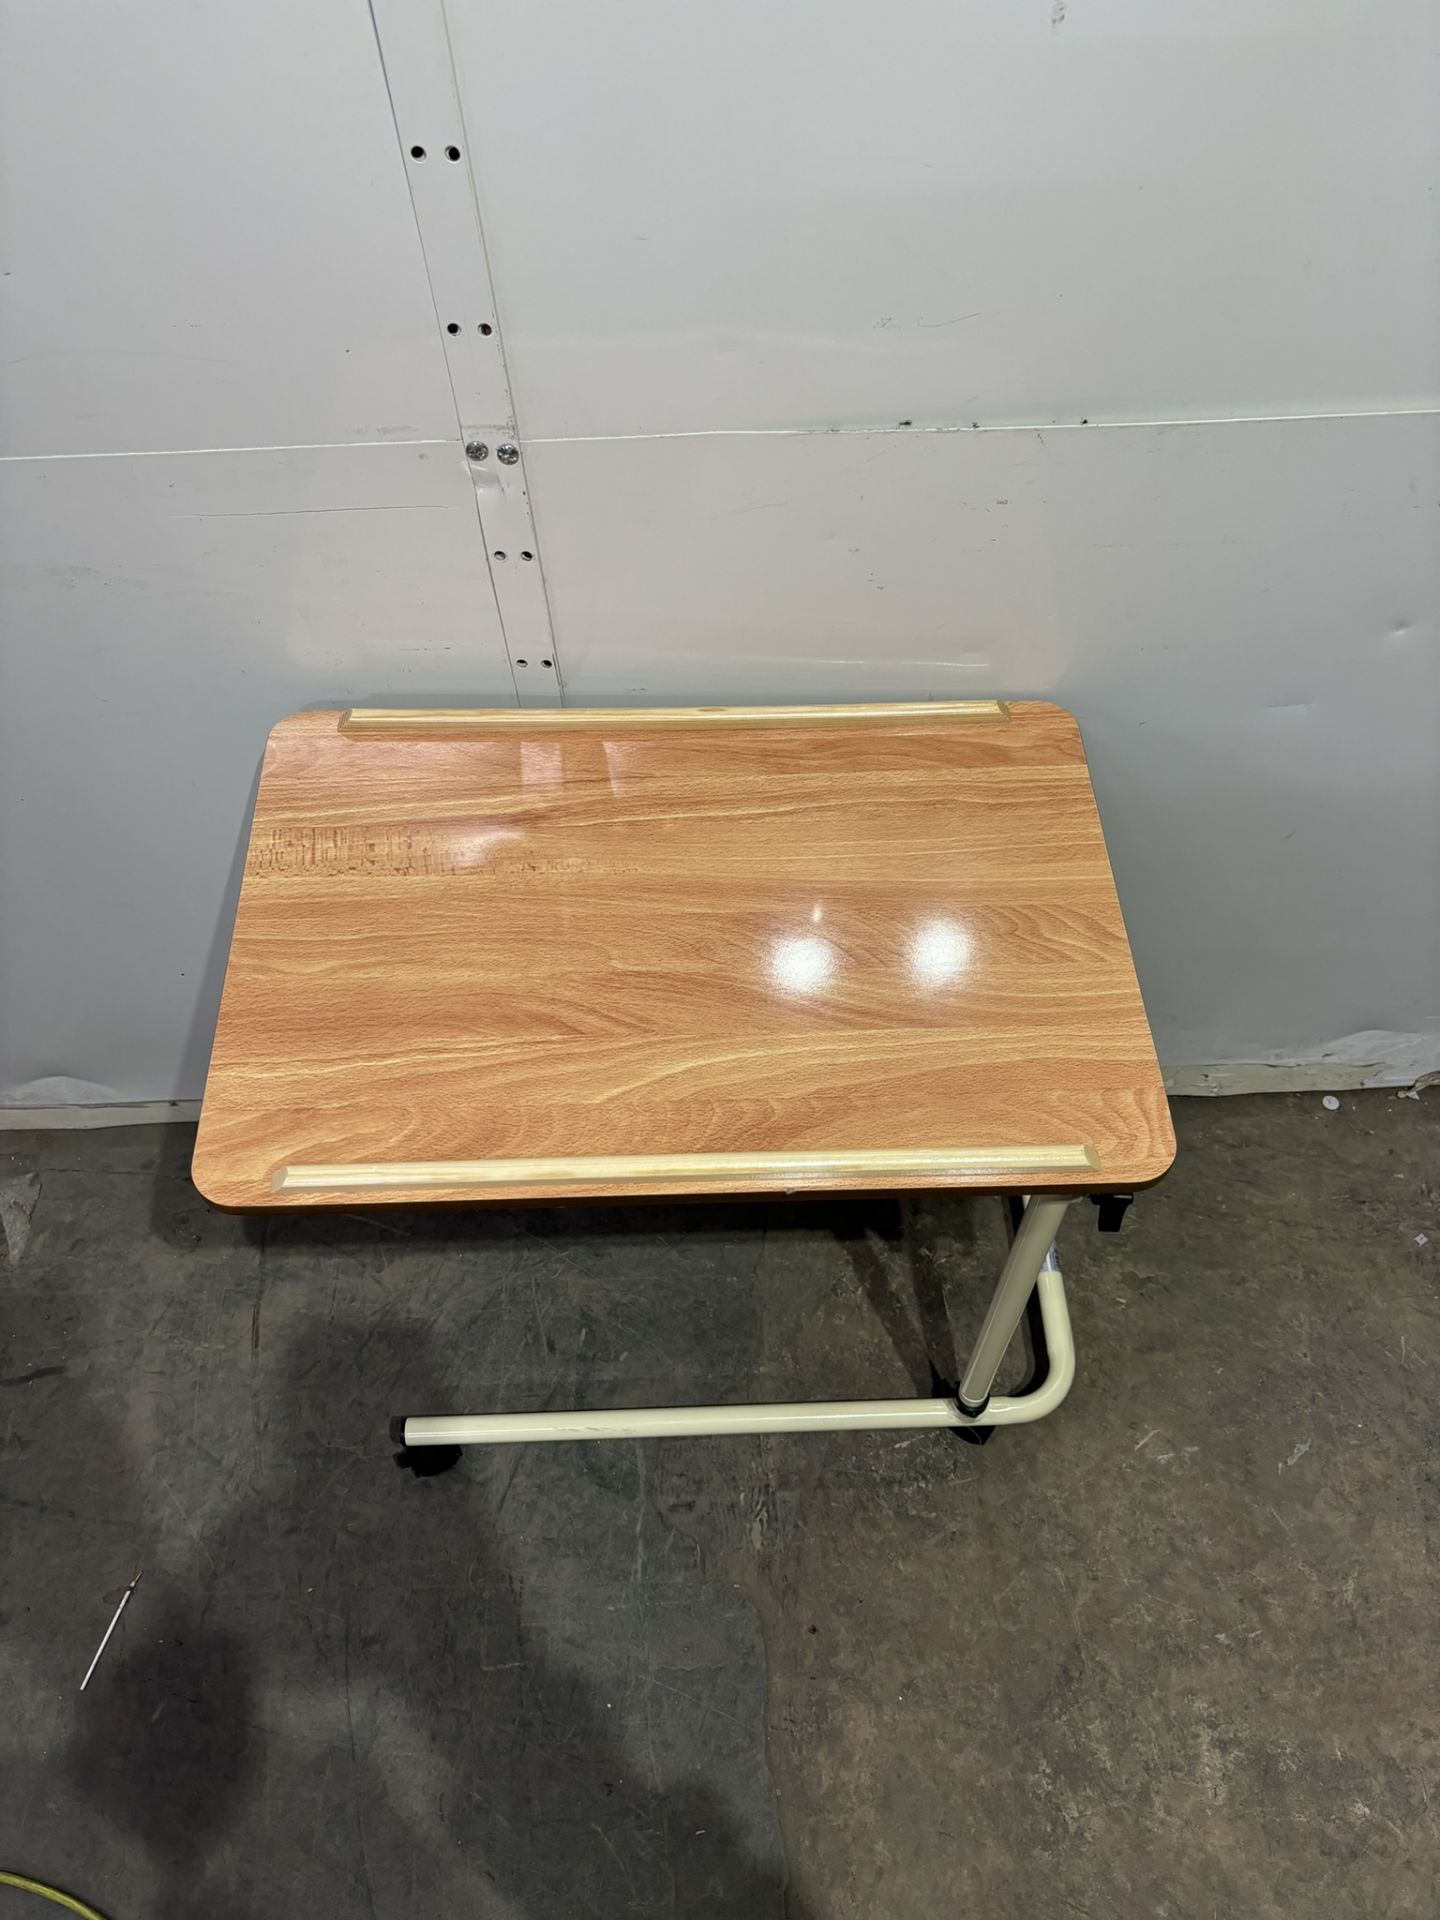 Perfomance Health Mobile Adjustable Overbed Table - Image 2 of 5